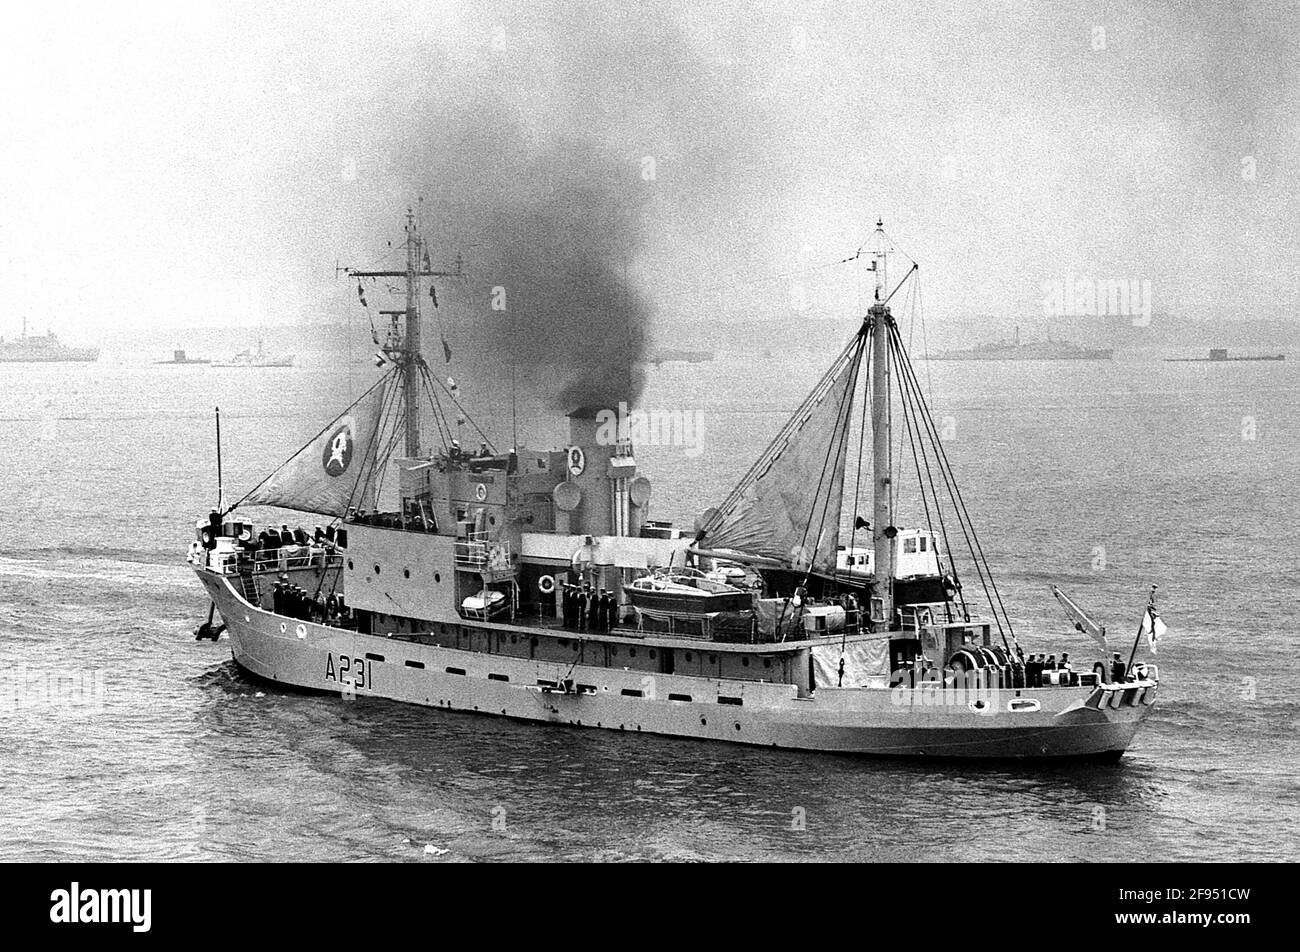 AJAXNETPHOTO. 25TH JUNE, 1977. PORTSMOUTH, ENGLAND. - LAST NAVY SAILING SHIP - H.M.S. RECLAIM, THE ROYAL NAVY'S DIVING SUPPORT SHIP, LEAVING HARBOUR TO TAKE UP HER SILVER JUBILEE FLEET REVIEW POSITION AT SPITHEAD. PHOTO:JONATHAN EASTLAND/AJAX REF:202206 68 Stock Photo